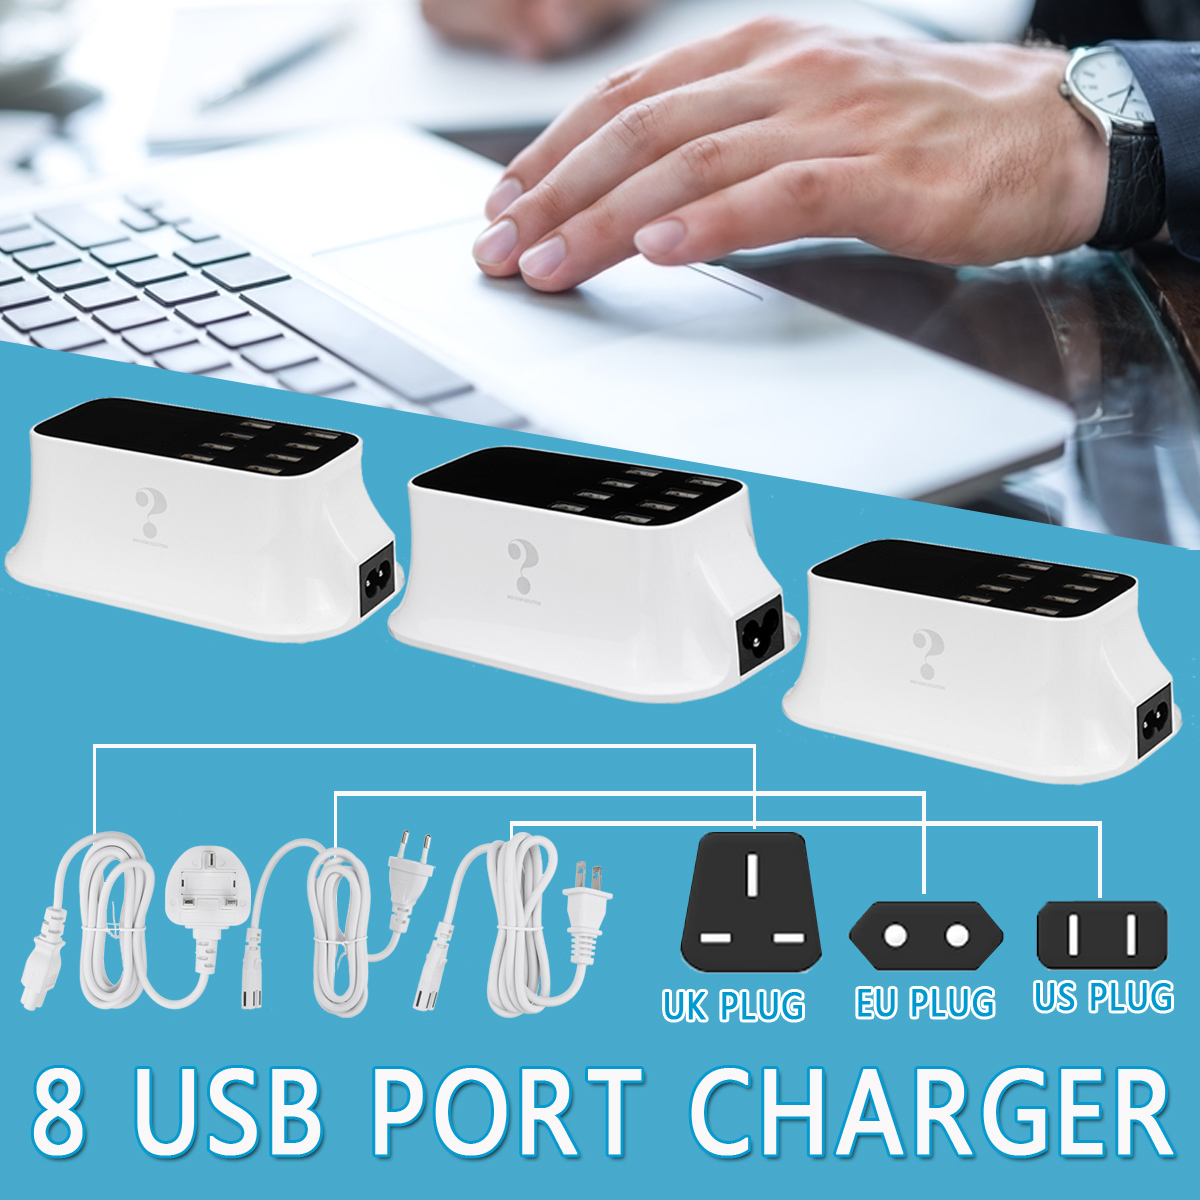 USB-Charger-8-Ports-Charging-Station-Multi-Port-USB-Charging-Hub-for-Multiple-Devices-1550725-2